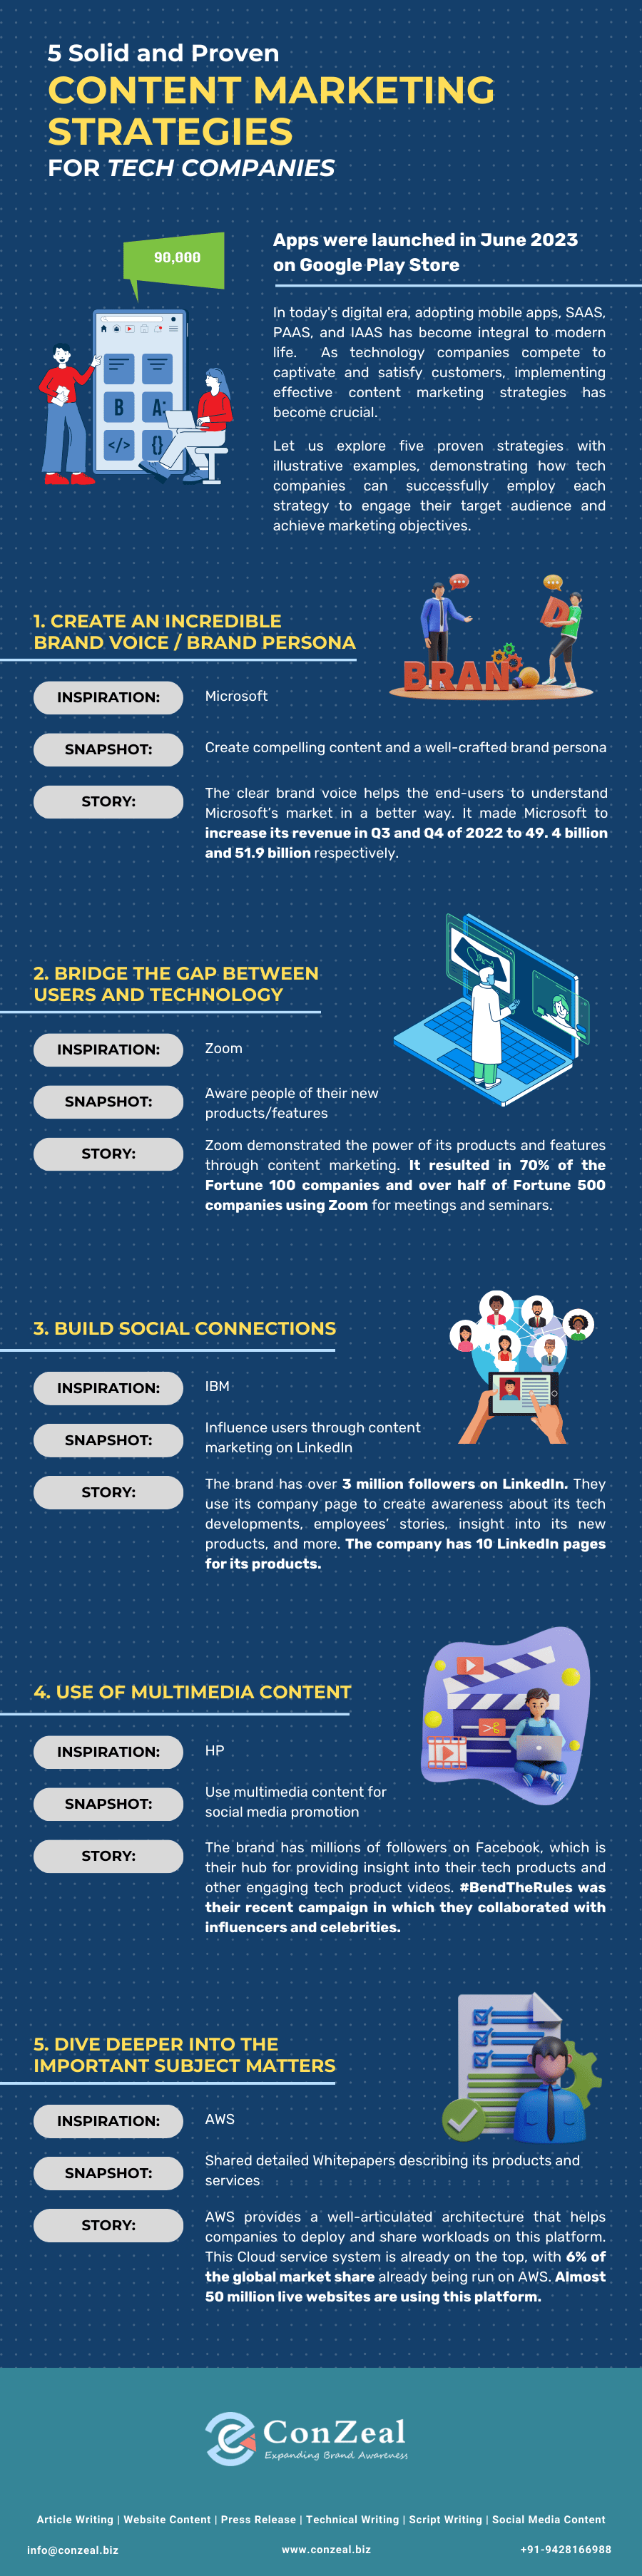 Content Marketing Strategies for Tech Companies - Infographic